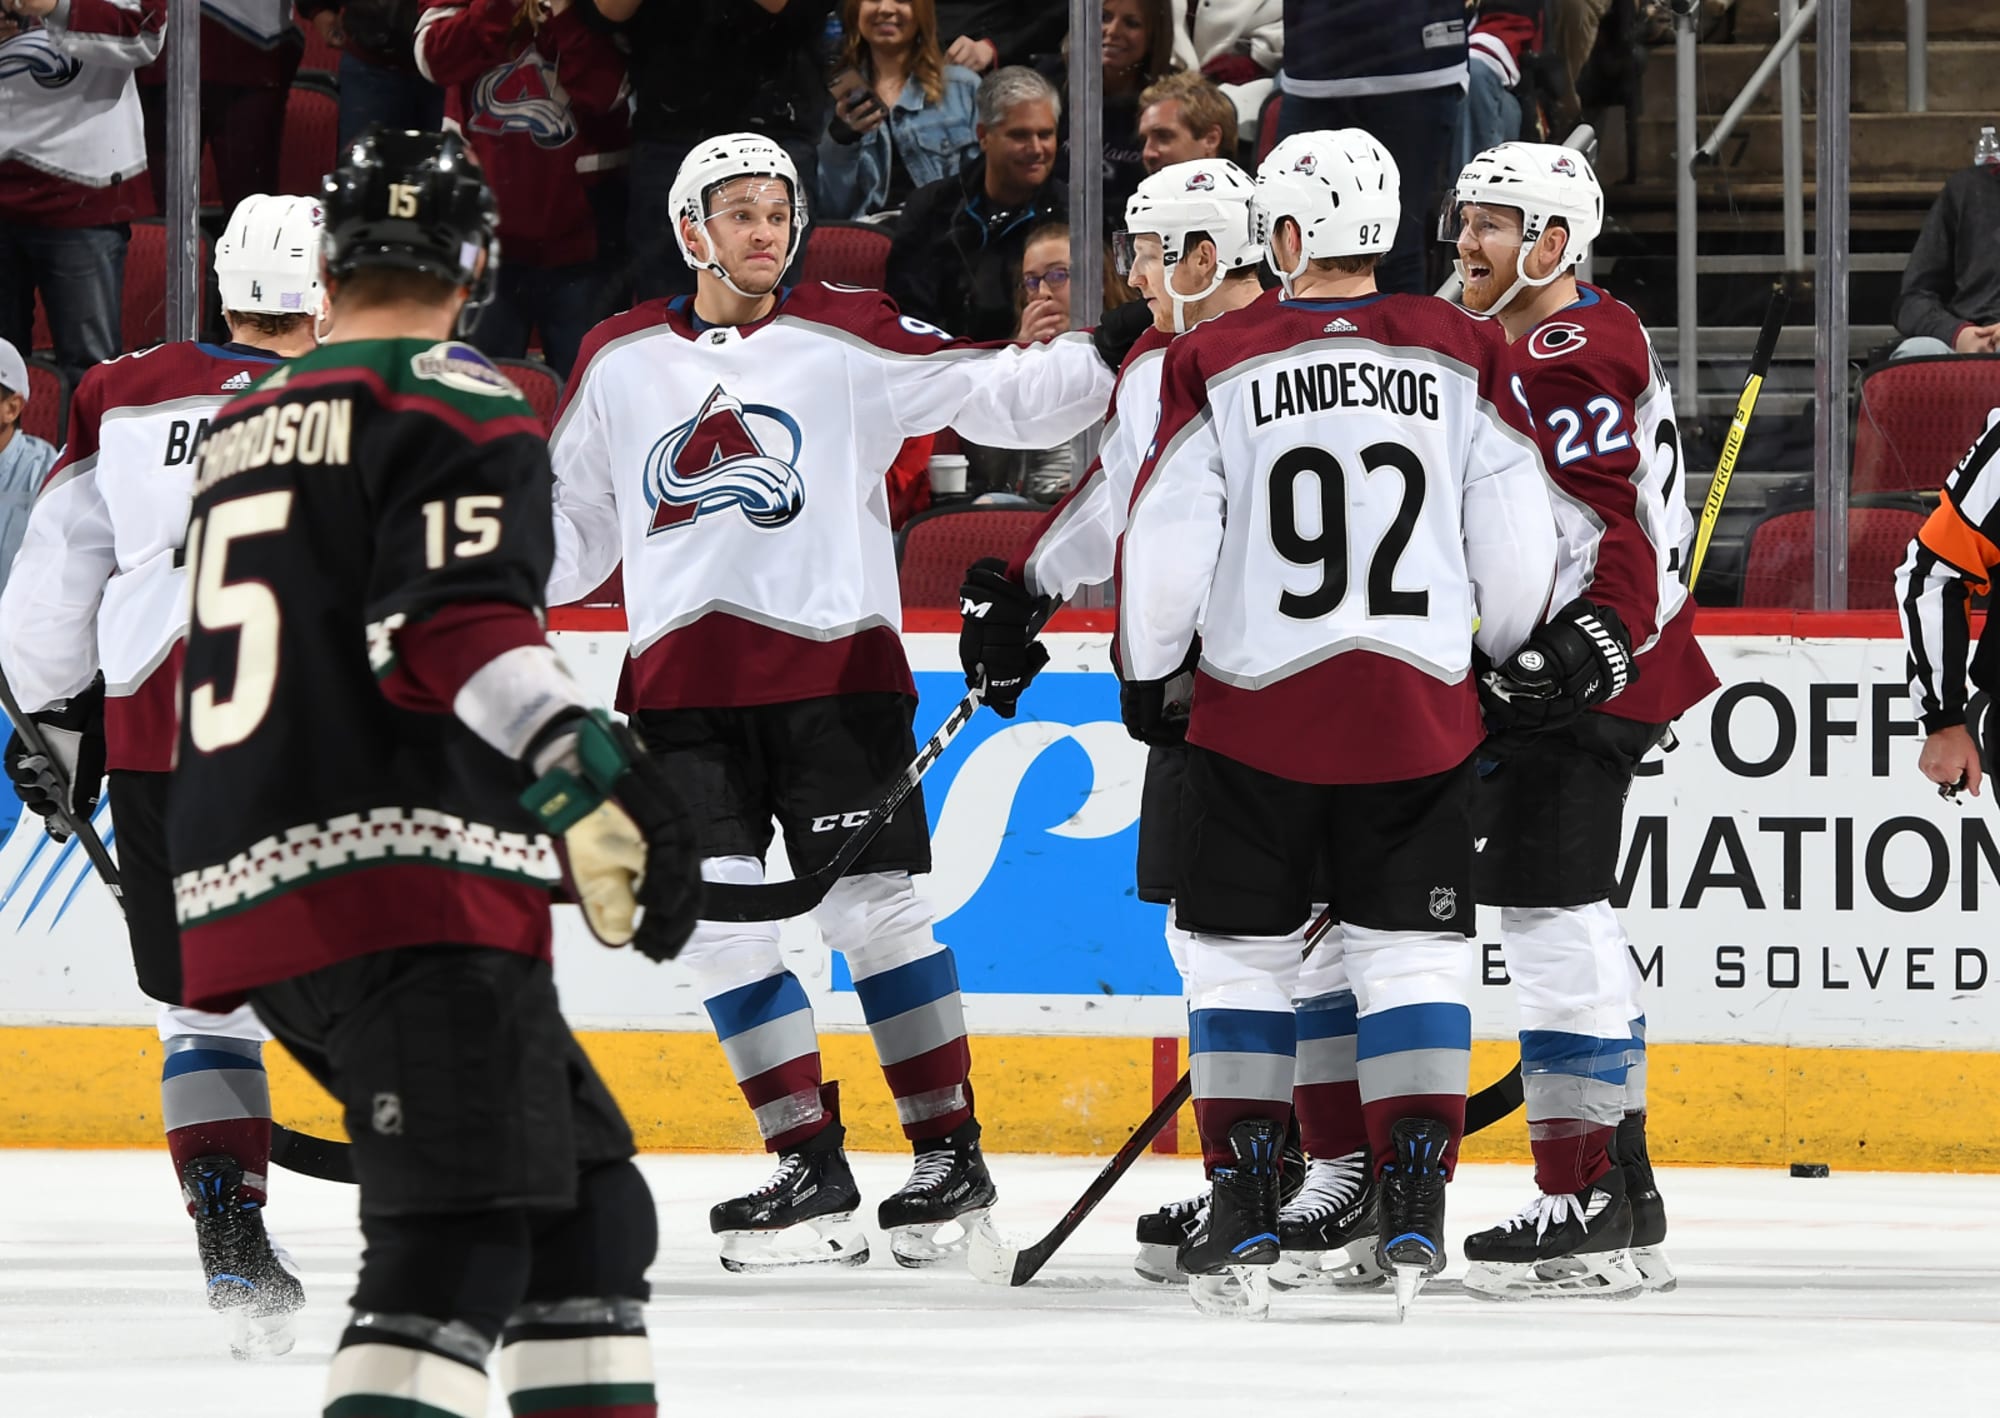 Colorado Avalanche Alternate Erik Johnson with Strong Words after Chicago  Loss